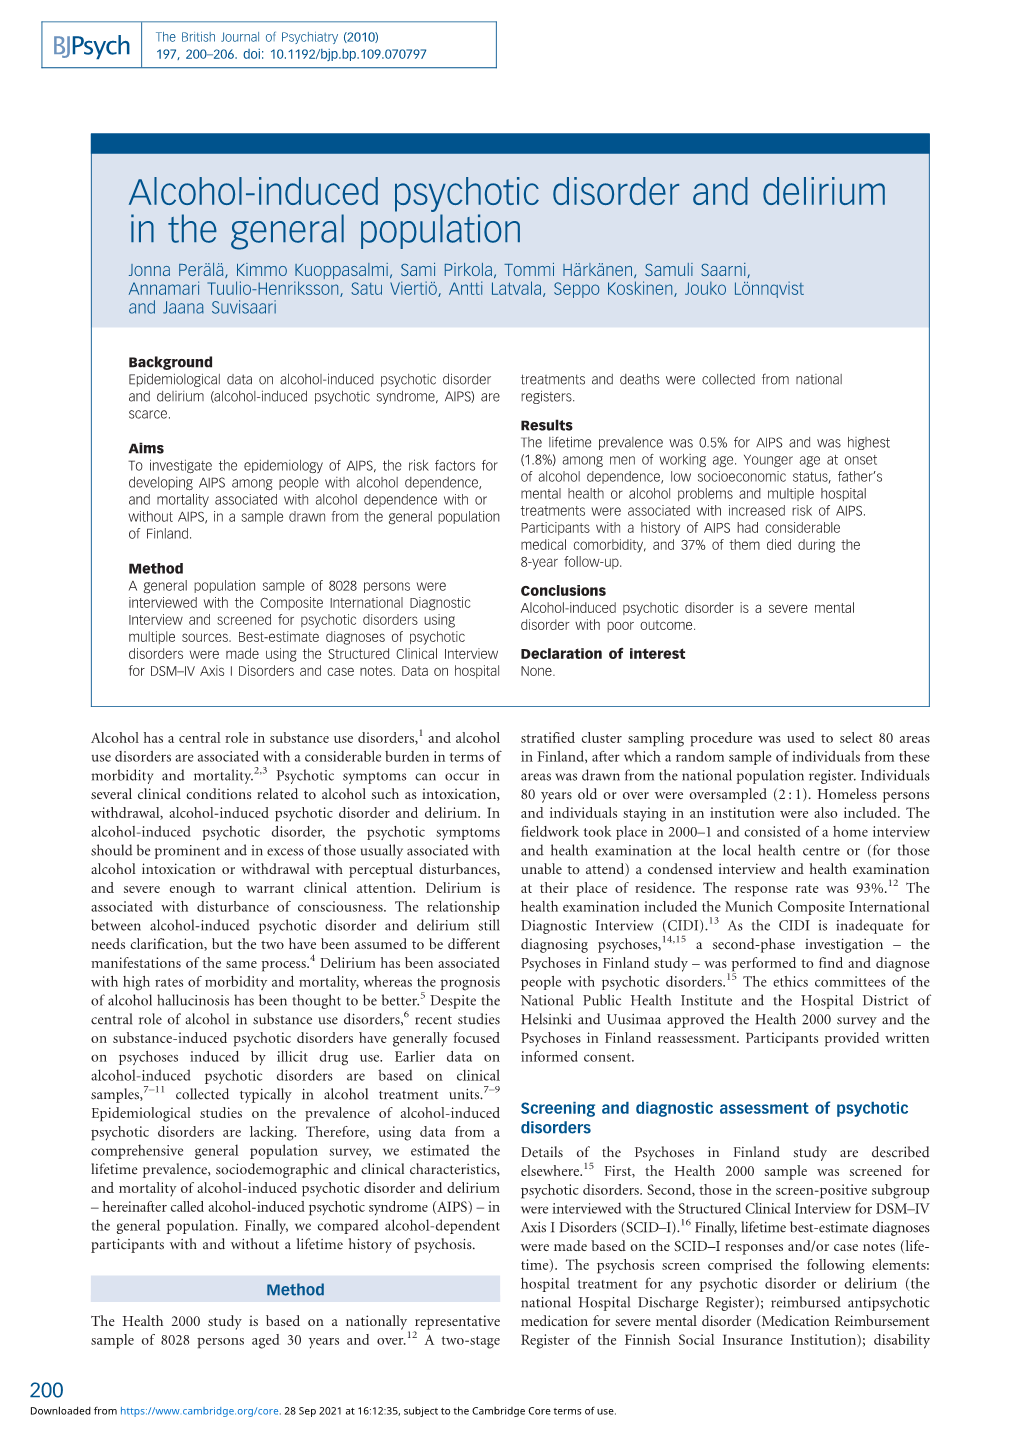 Alcohol-Induced Psychotic Disorder and Delirium in the General Population